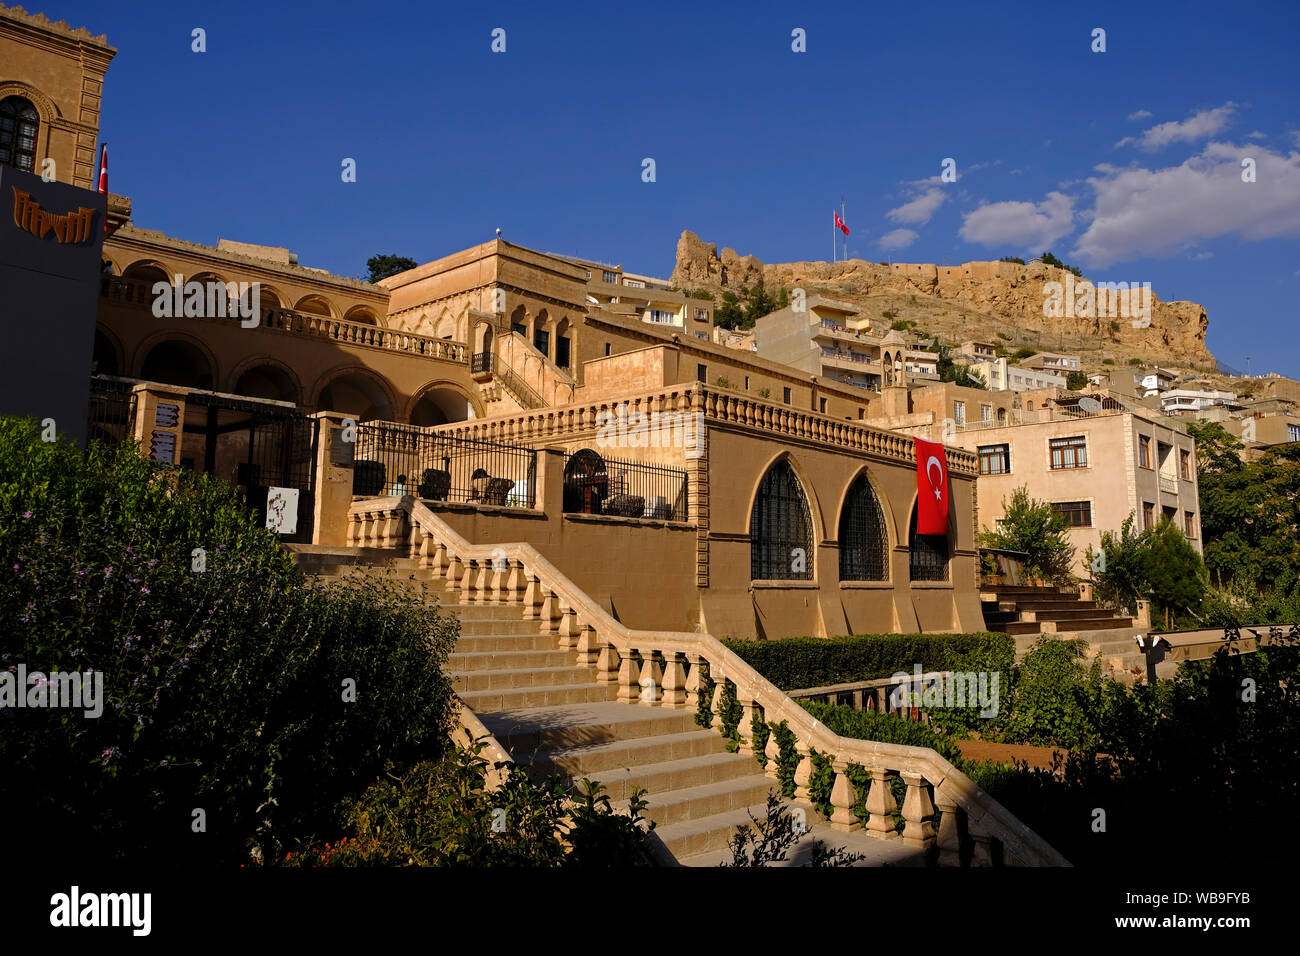 Mardin is a city that combines its rich, mystical and historical heritage with modernity. The city has bazaars, historic inns, museums, stone houses. Stock Photo